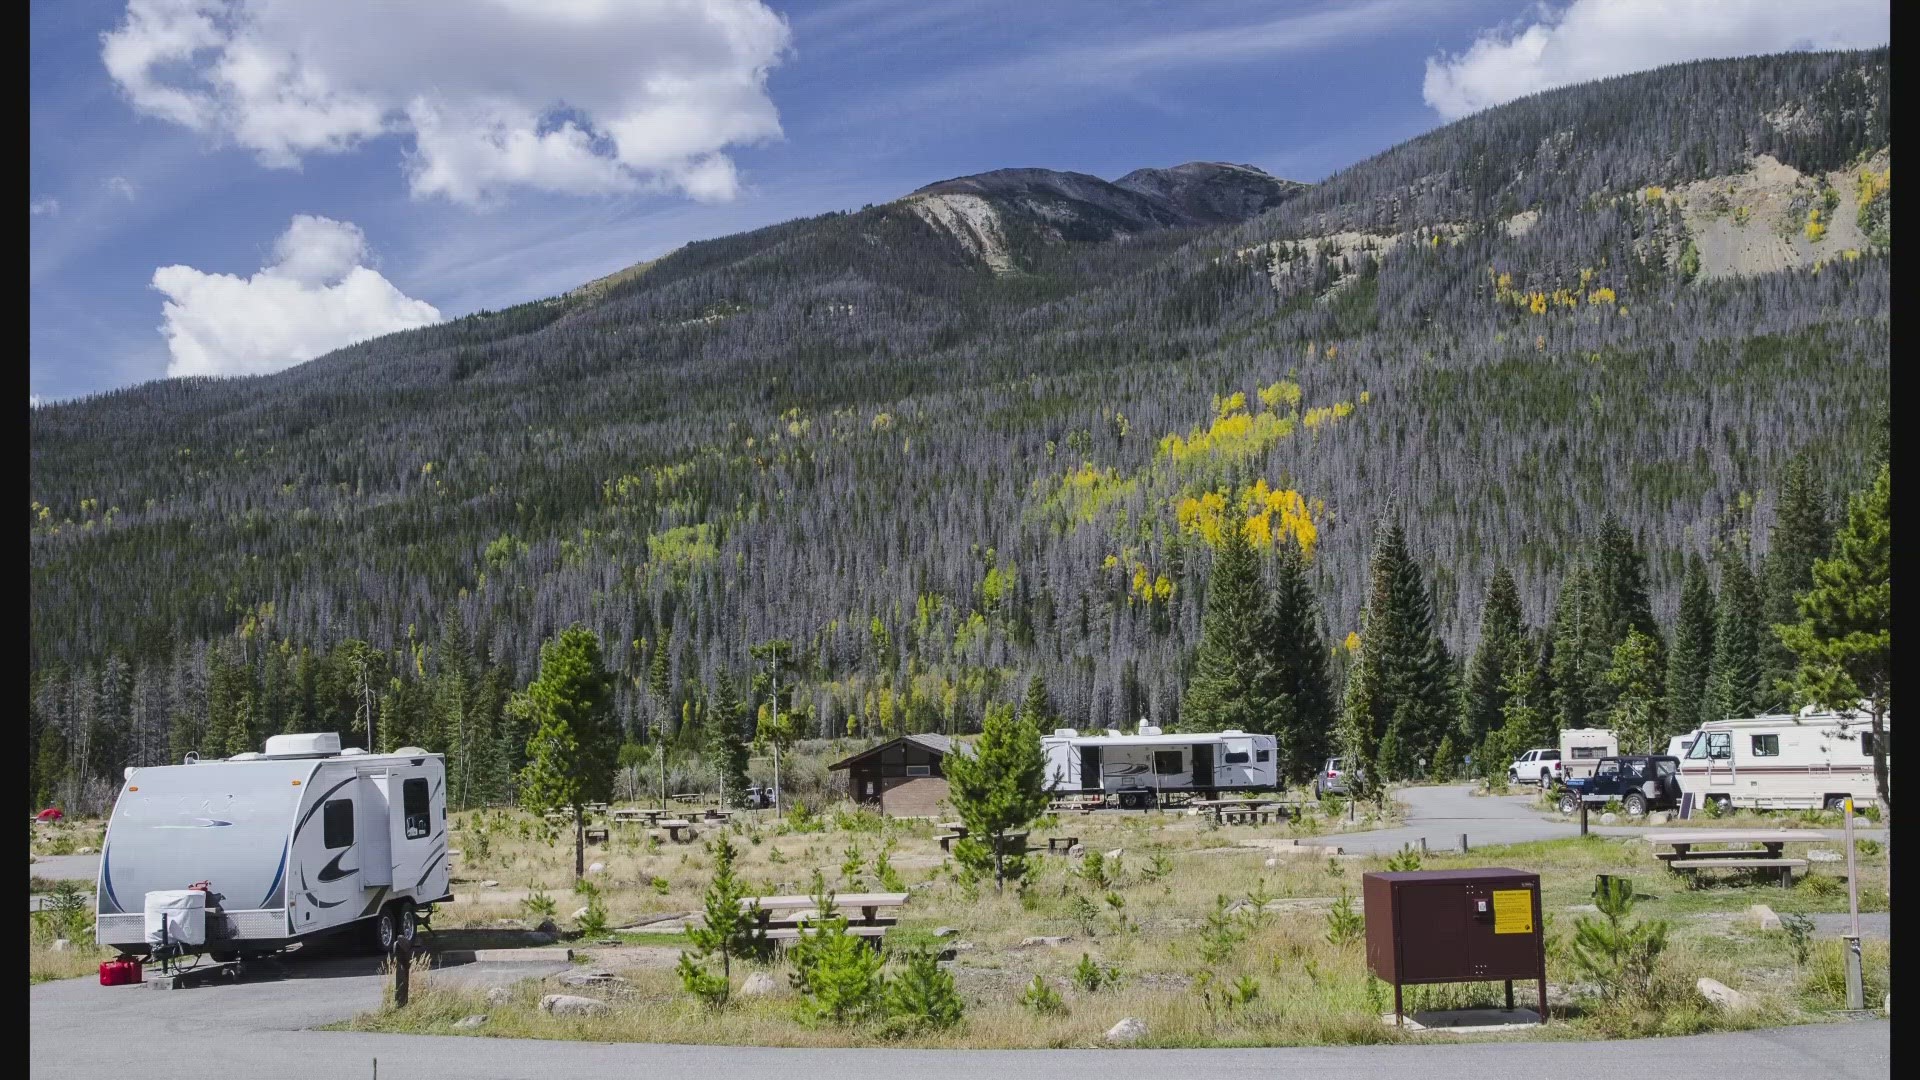 Rocky Mountain National Park is proposing a $10 increase in summer camping fees at four campgrounds beginning next year.